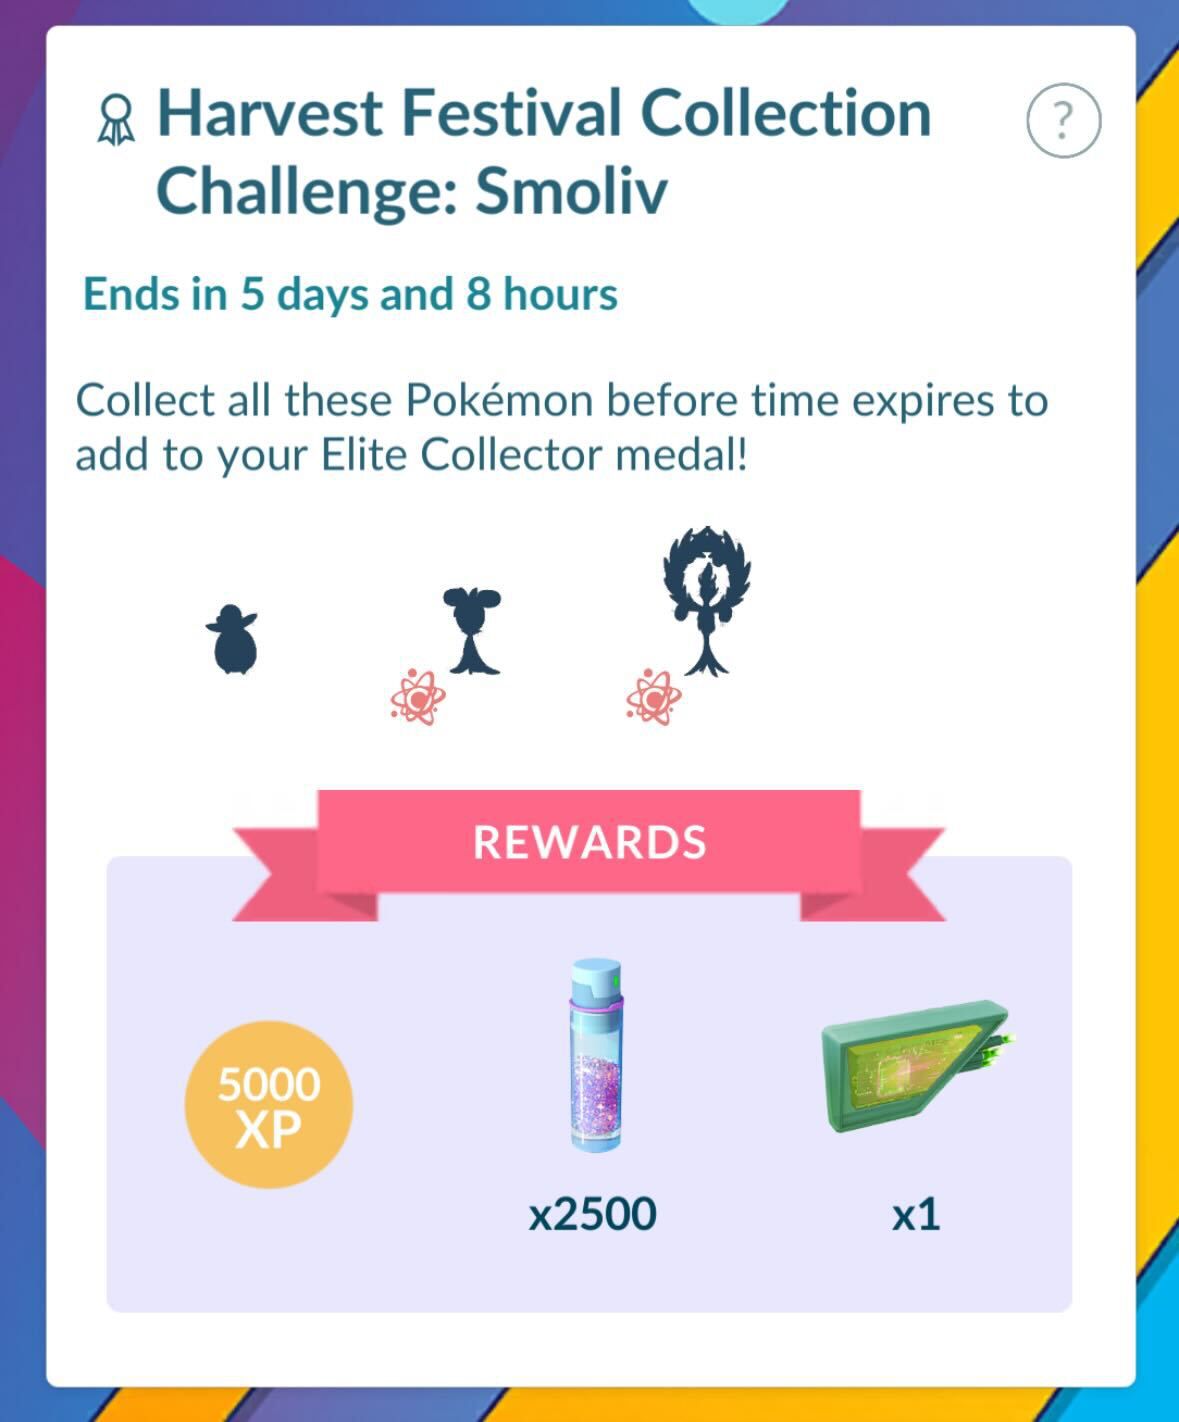 The Collection Challenge for Smoliv in Pokémon Go’s 2023 Harvest Festival.